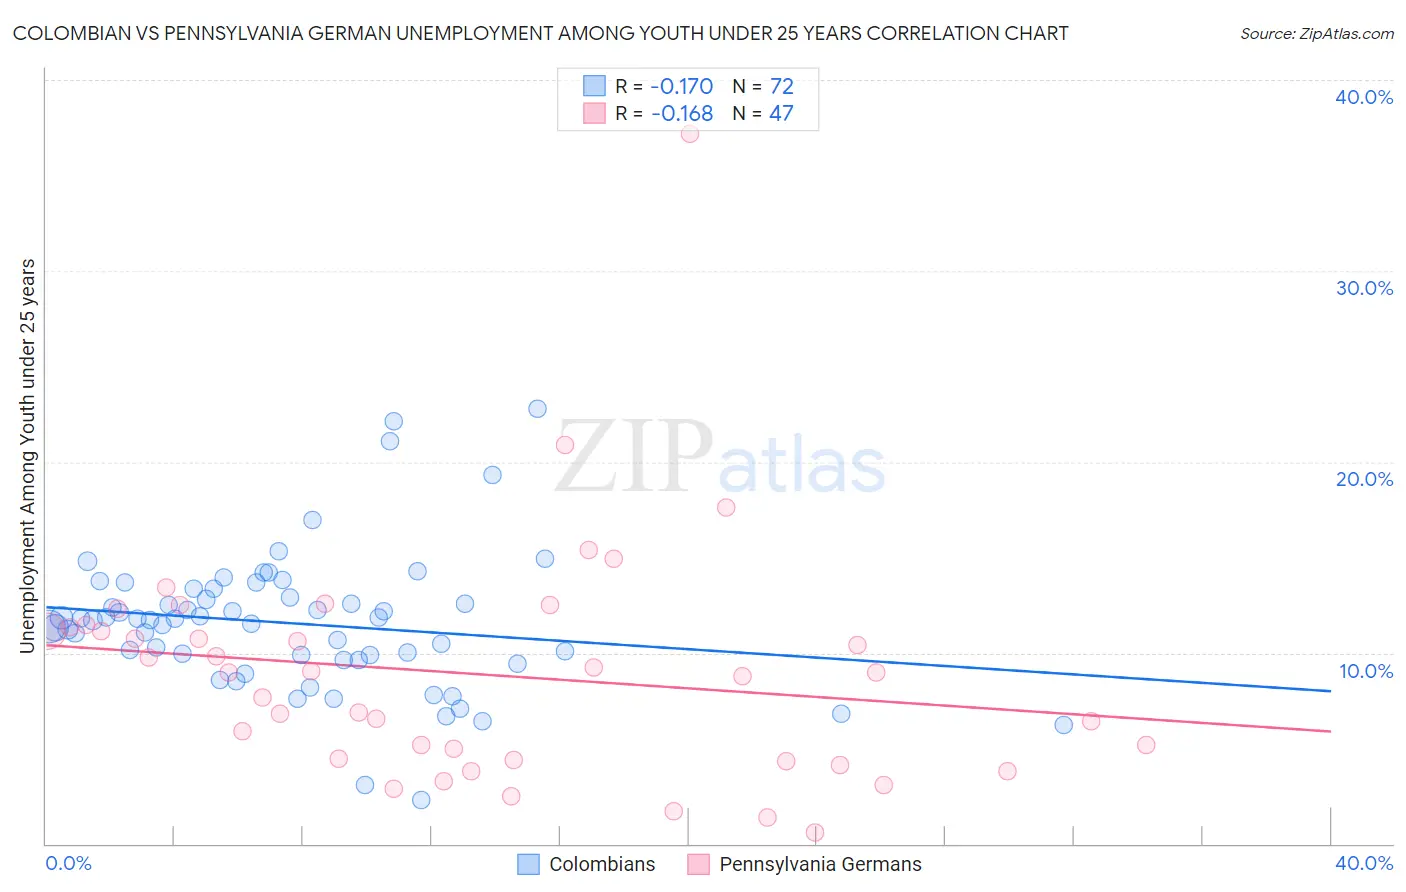 Colombian vs Pennsylvania German Unemployment Among Youth under 25 years